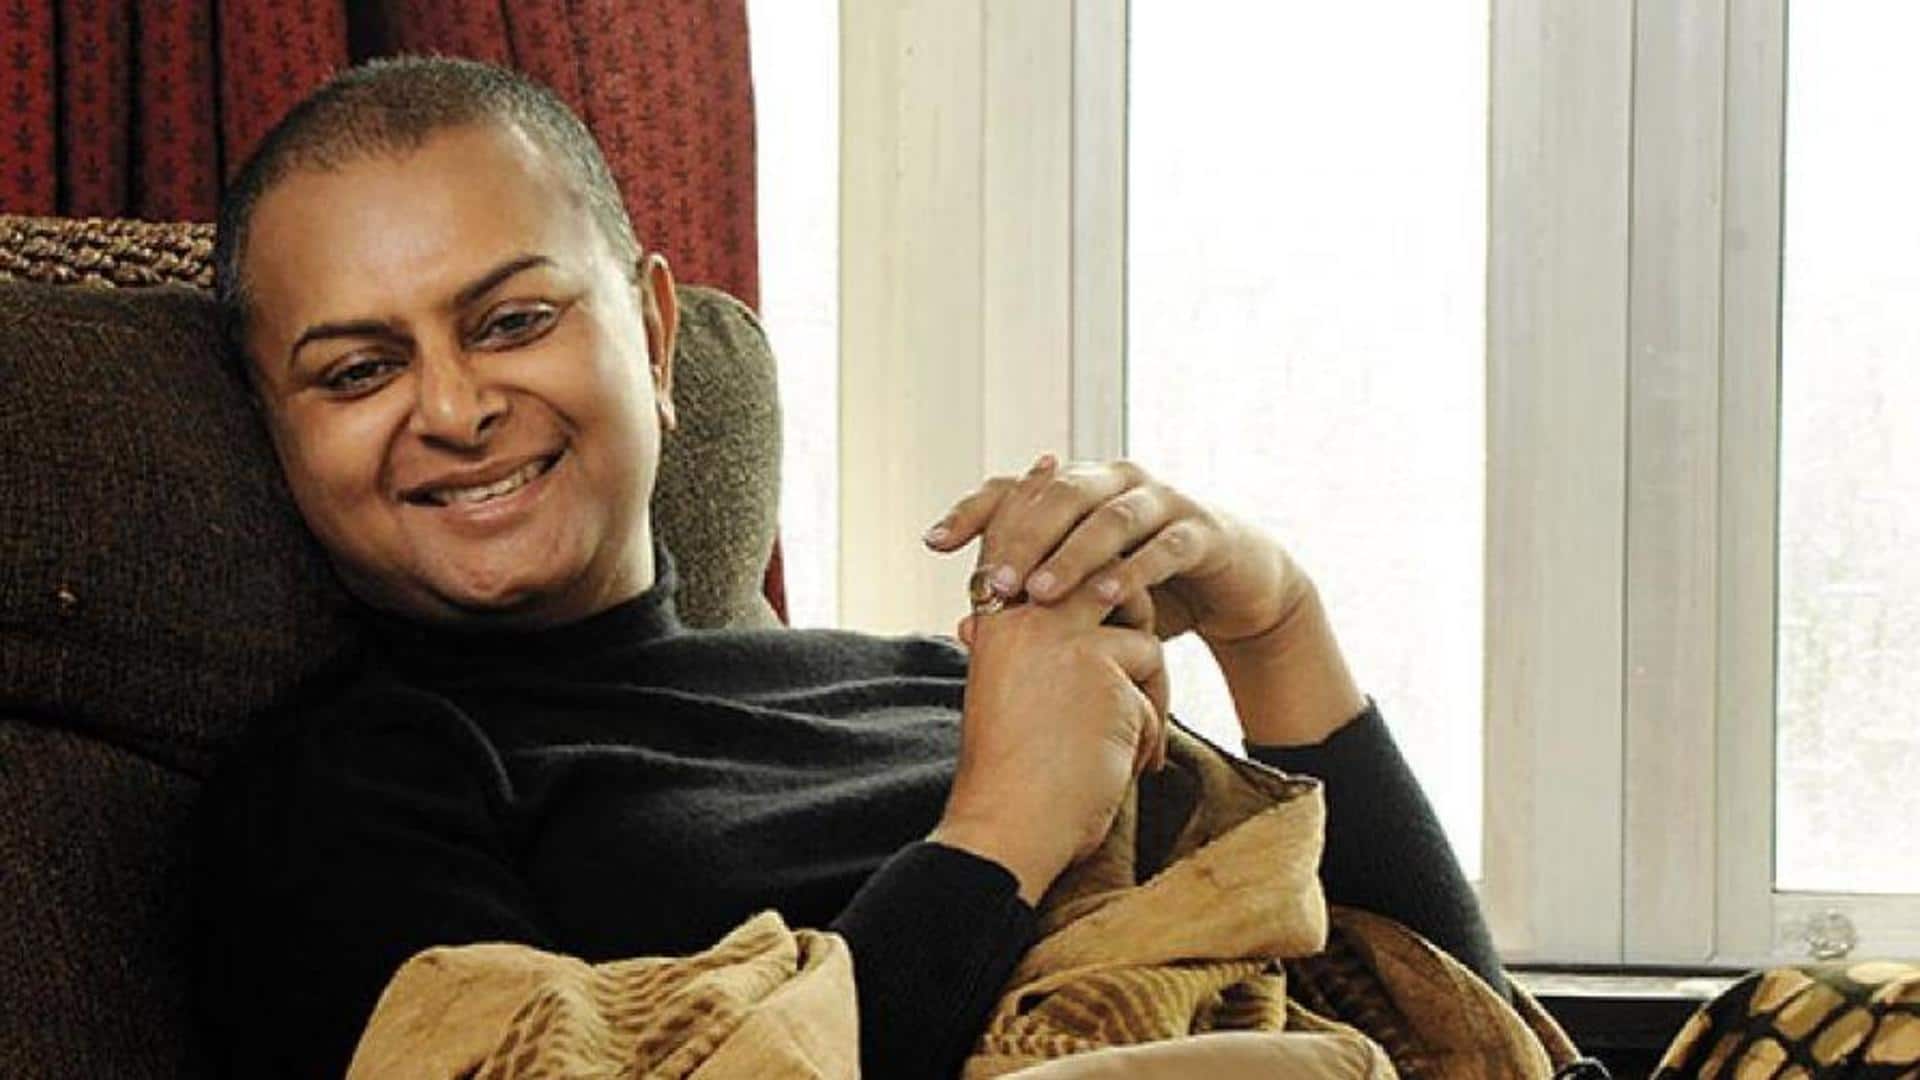 Rituparno Ghosh death anniversary: Directing pan-Indian films with universal storytelling